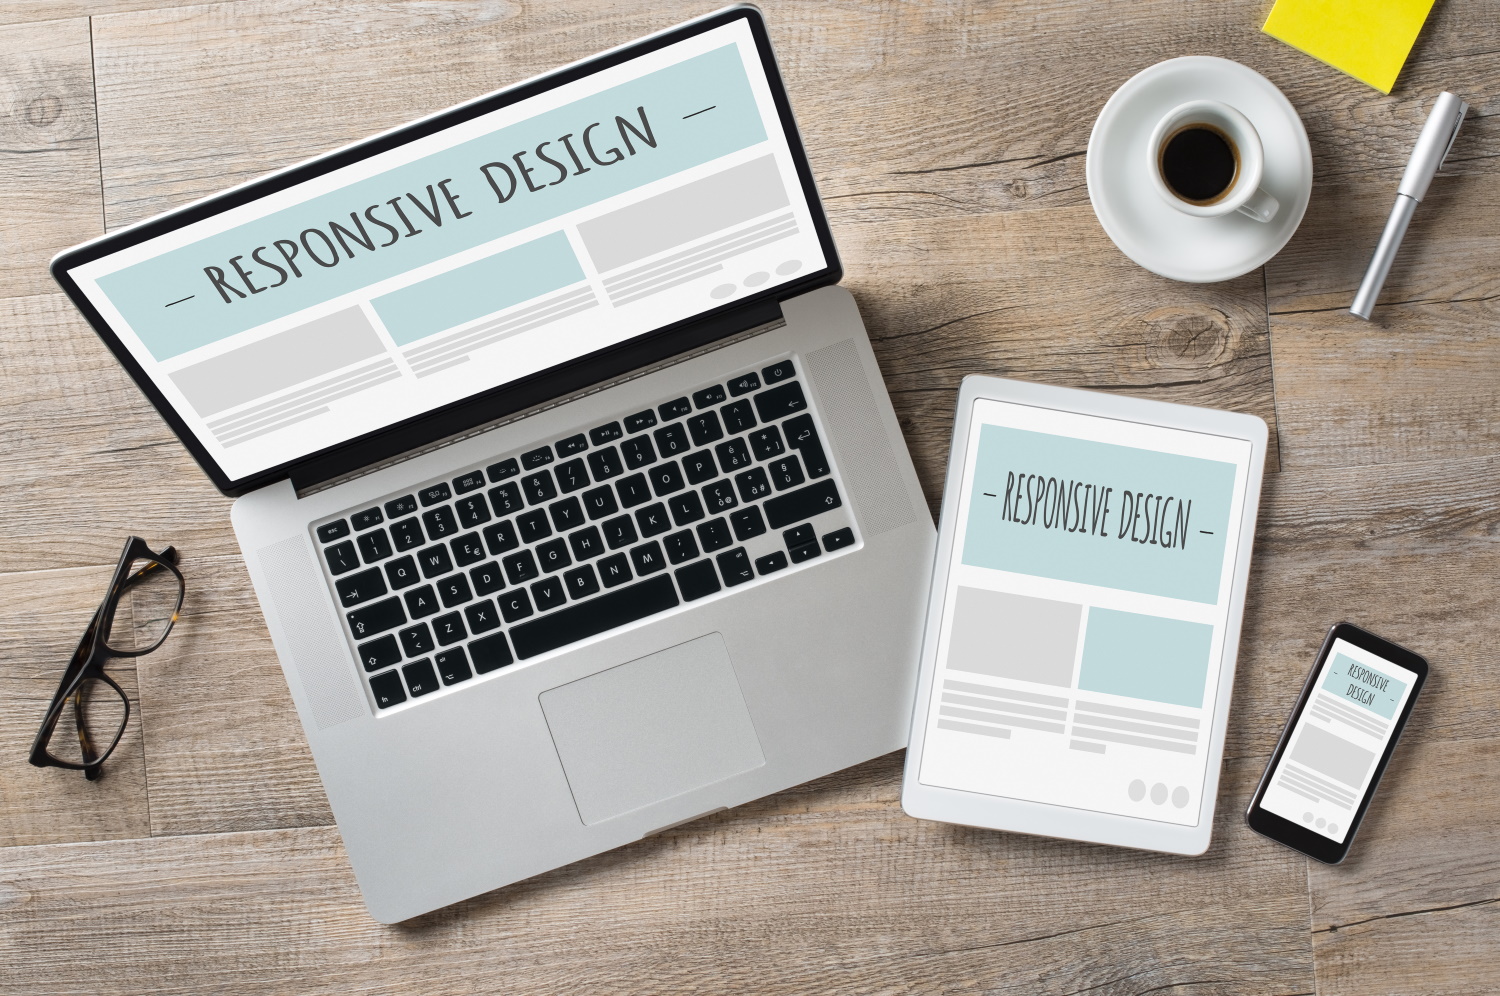 Bspoke Design - The pros & cons of optimizing your website for mobile